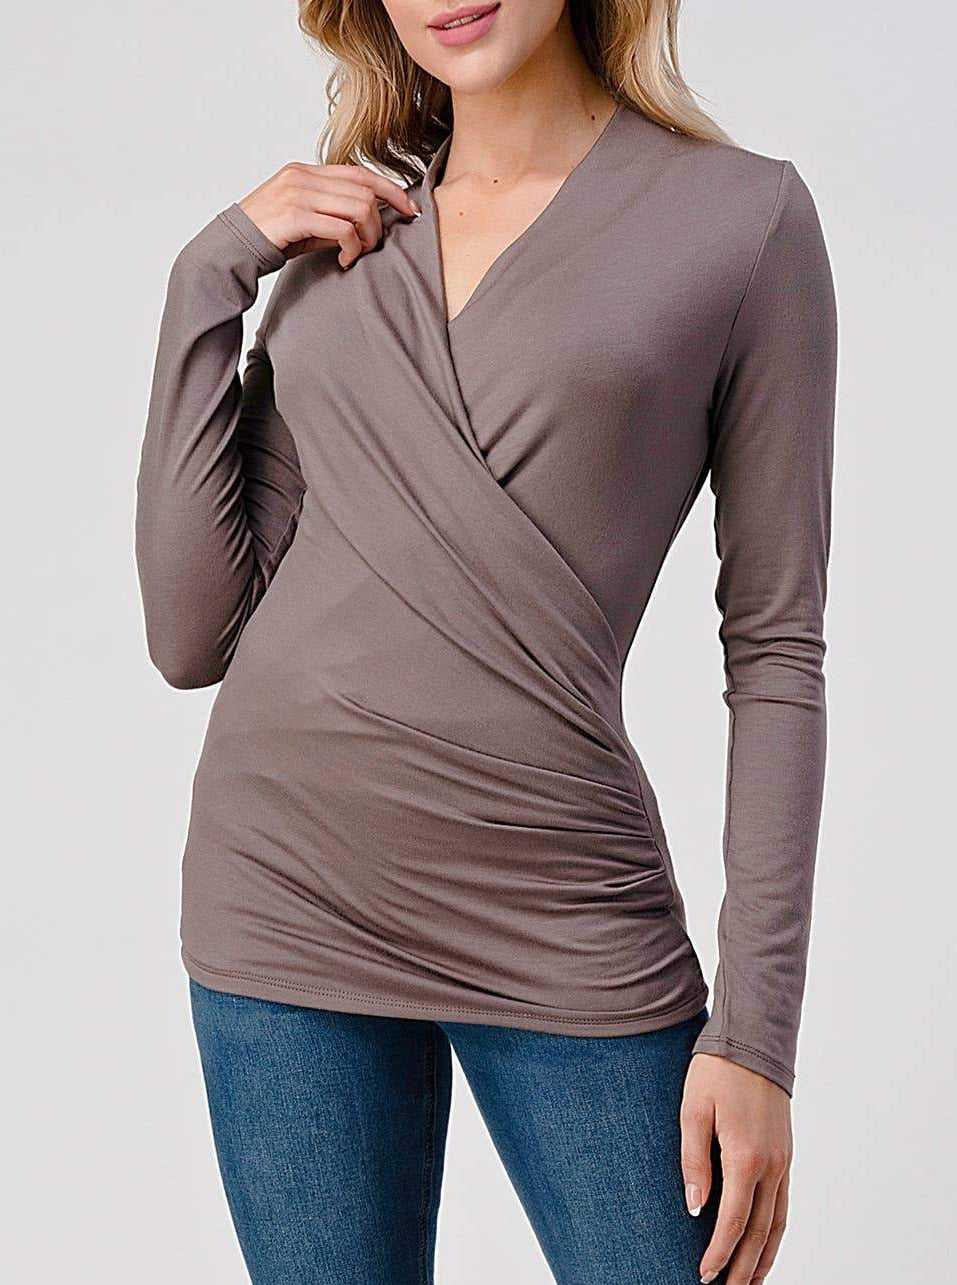 Heimious Ruched Surplice Top - Taupe